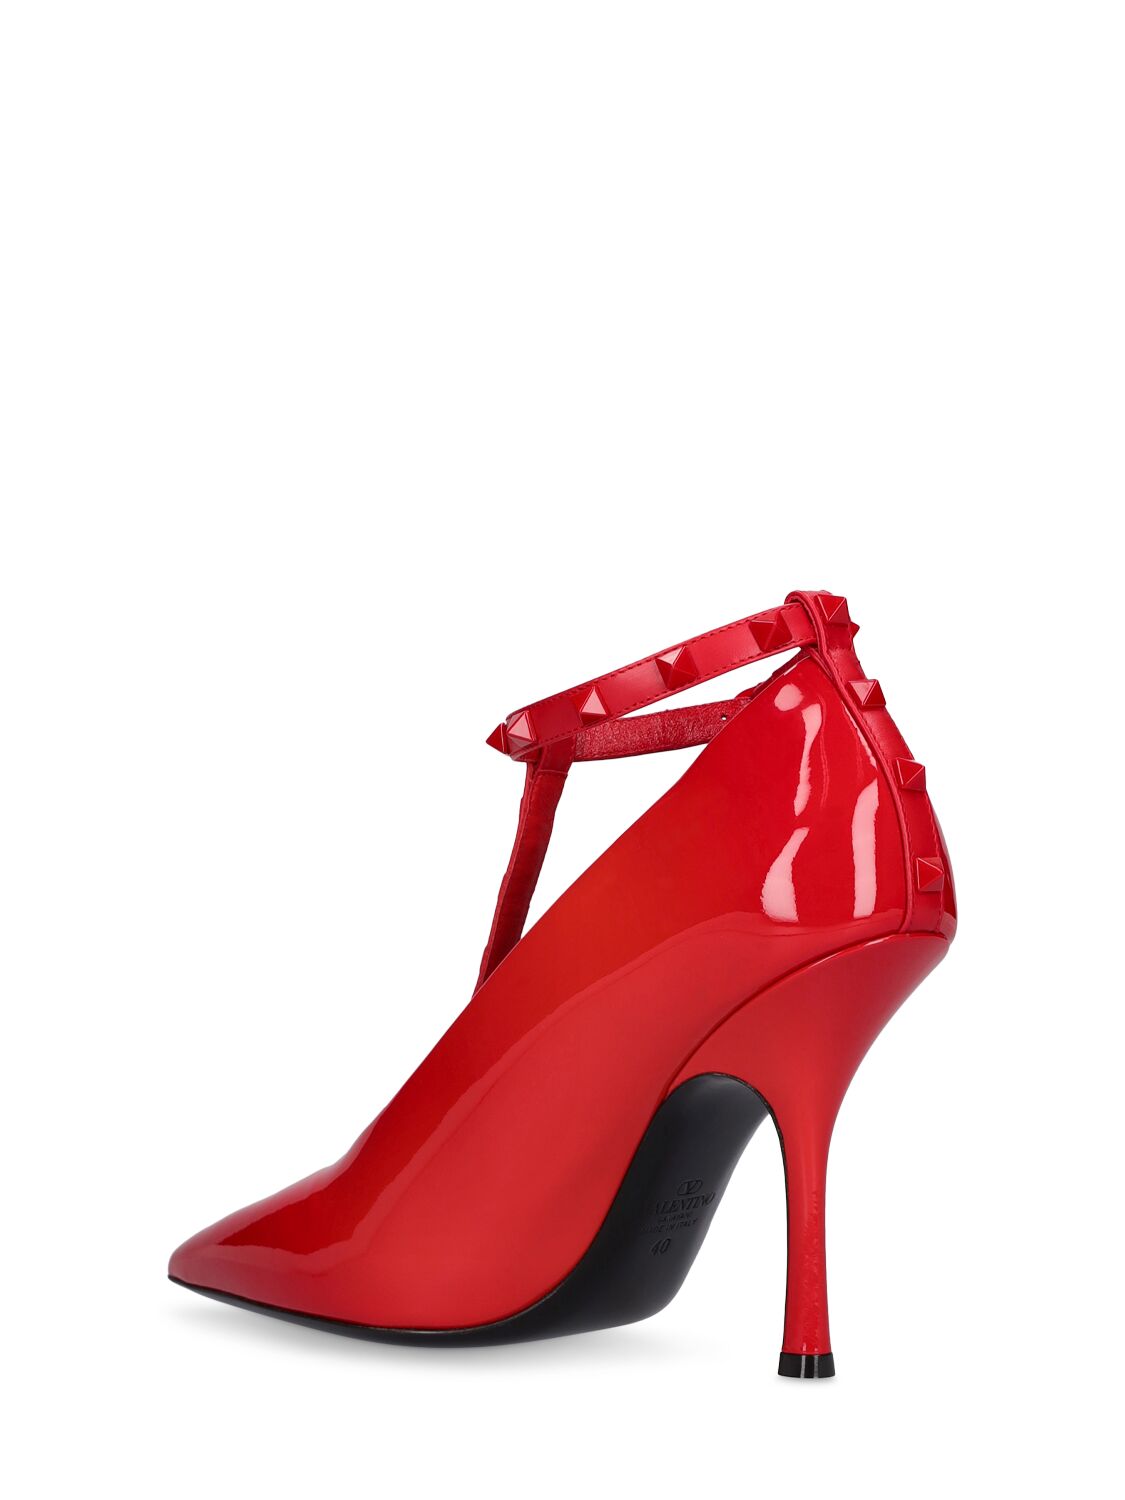 Shop Valentino 100mm Rockstud Patent Leather Pumps In Red